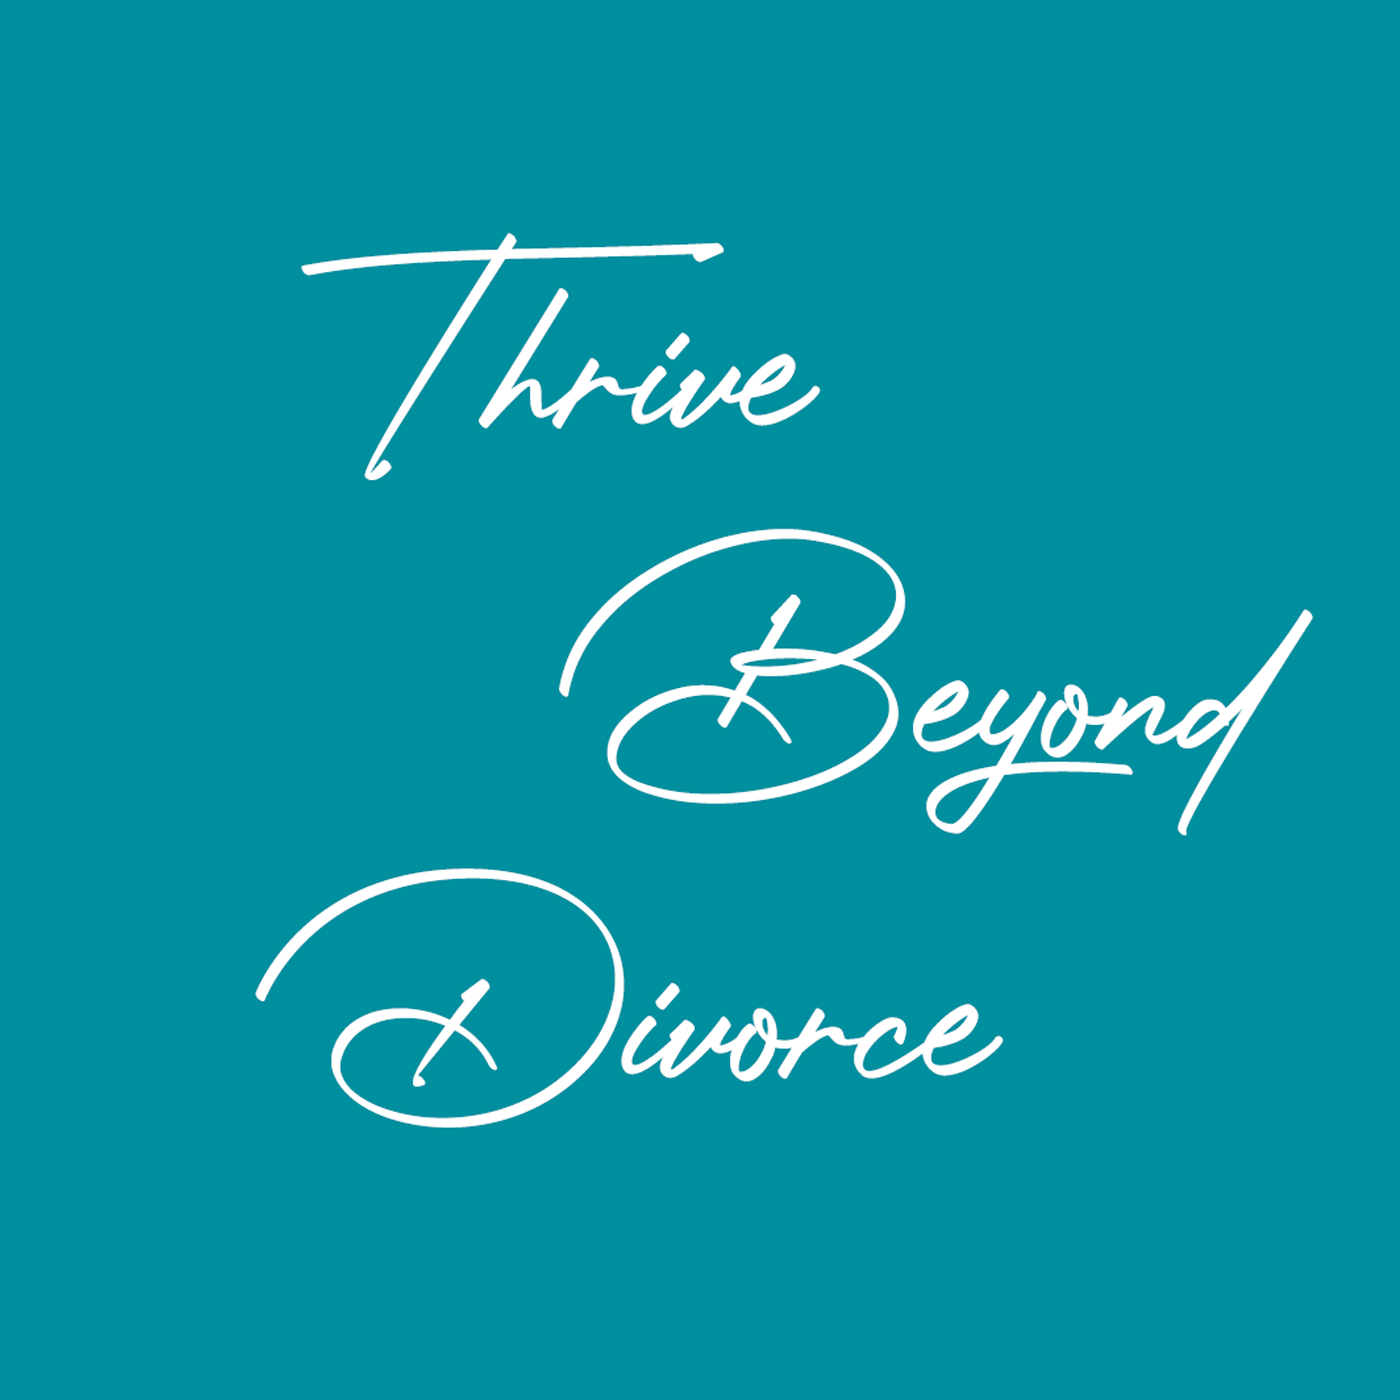 Coping with COVID-19 Coronavirus – Thrive Beyond Divorce Podcast Episode 1